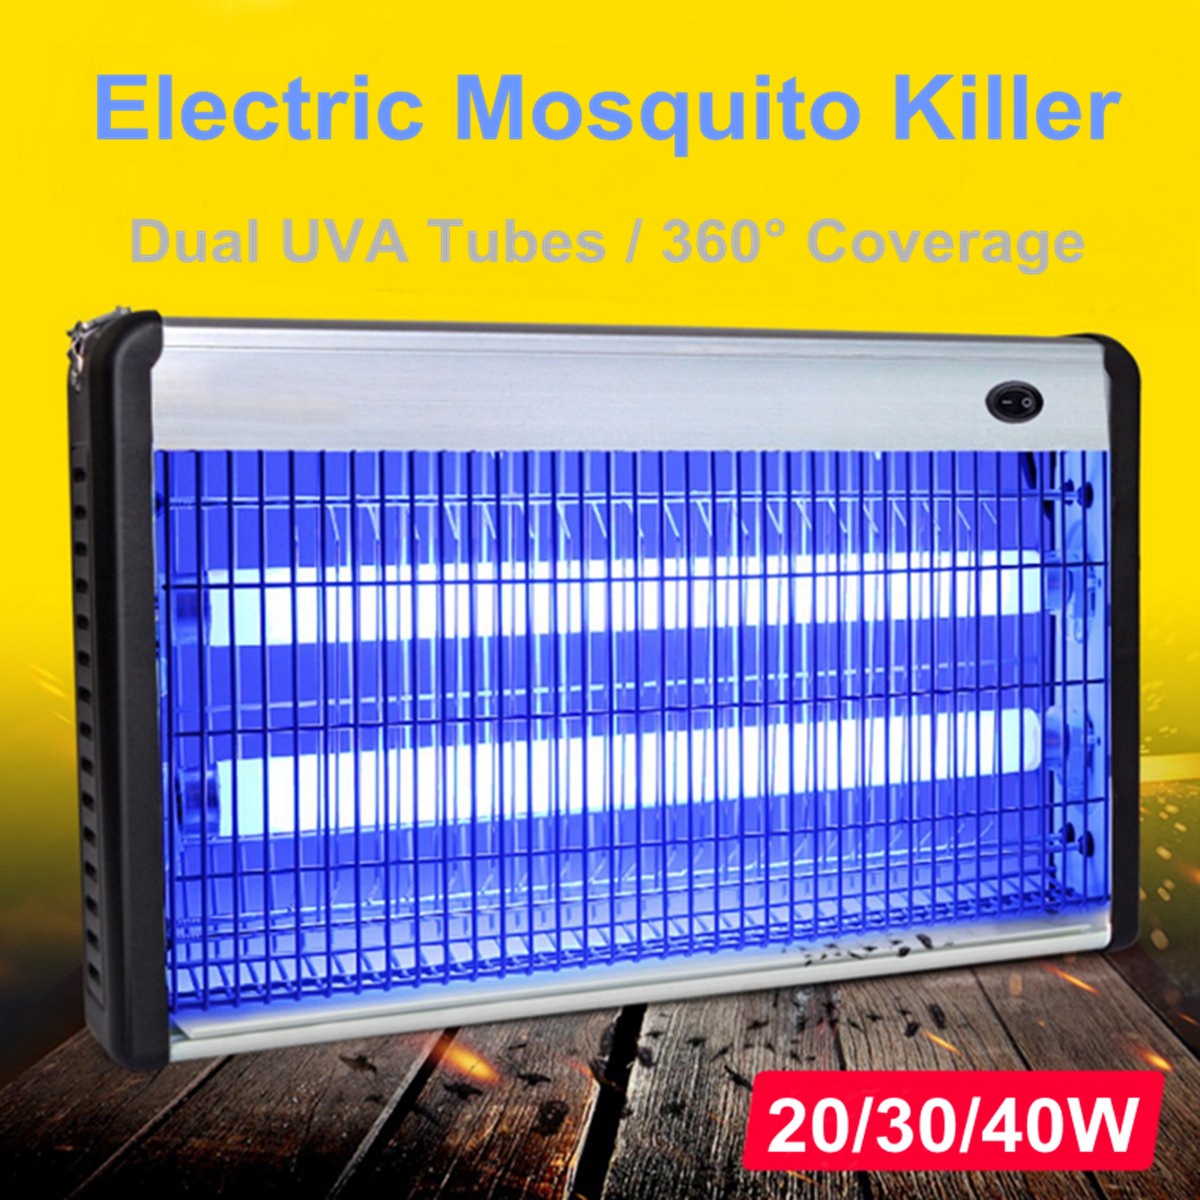 203040W-Electric-LED-Light-Mosquito-Killer-UV-A-Fly-Bug-Insect-Zapper-Trap-Catcher-Lamp-1421784-1